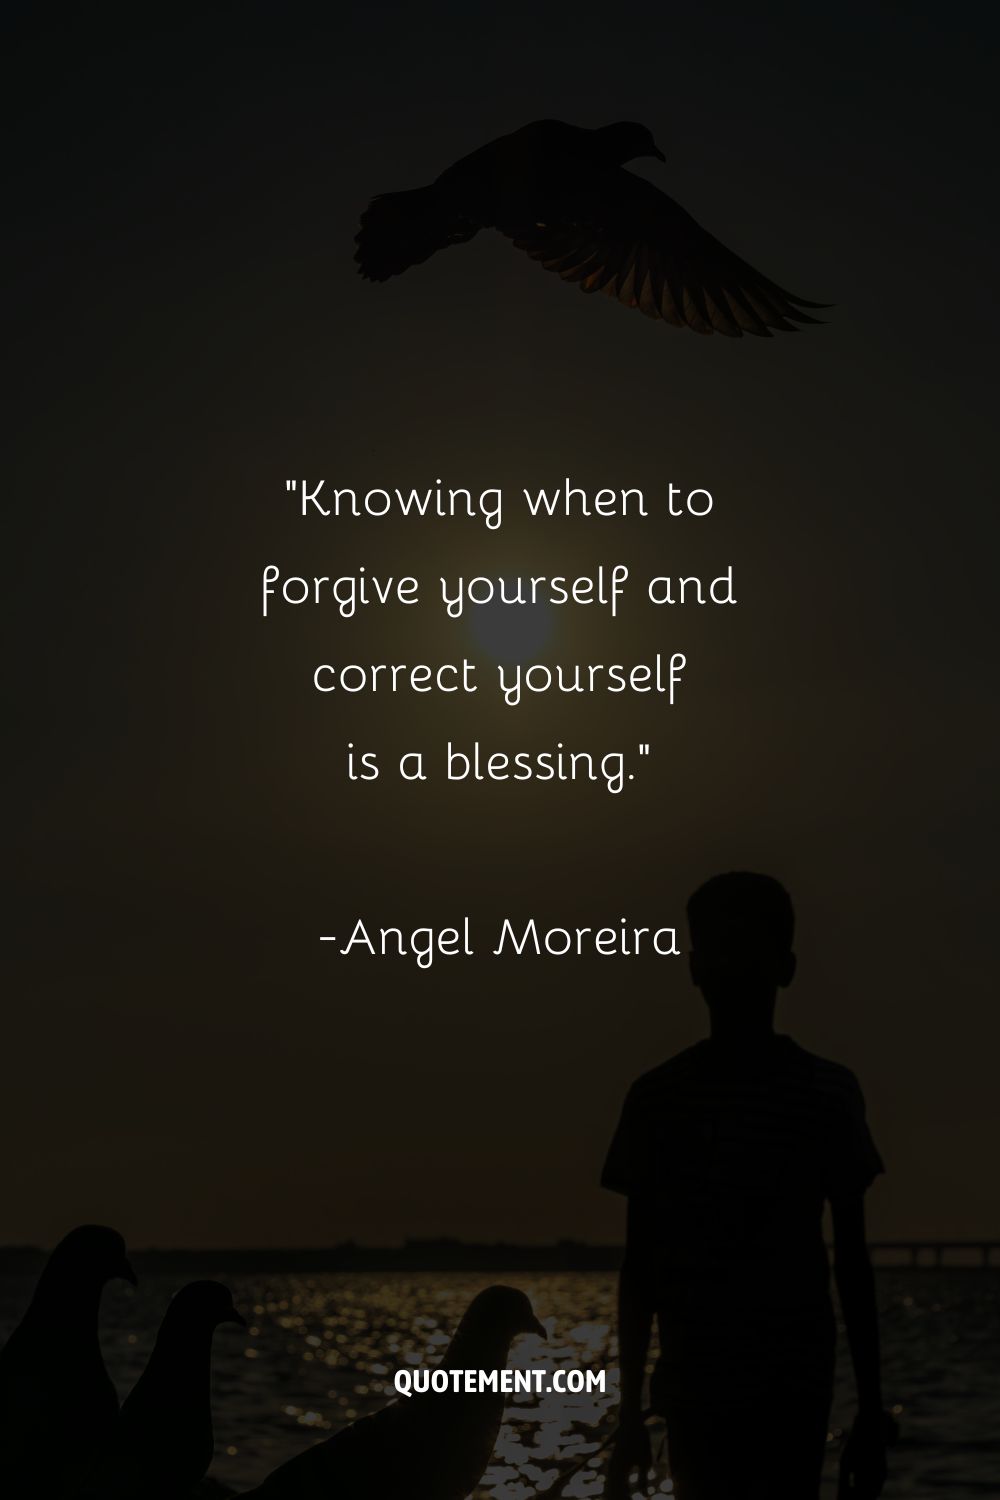 “Knowing when to forgive yourself and correct yourself is a blessing.”